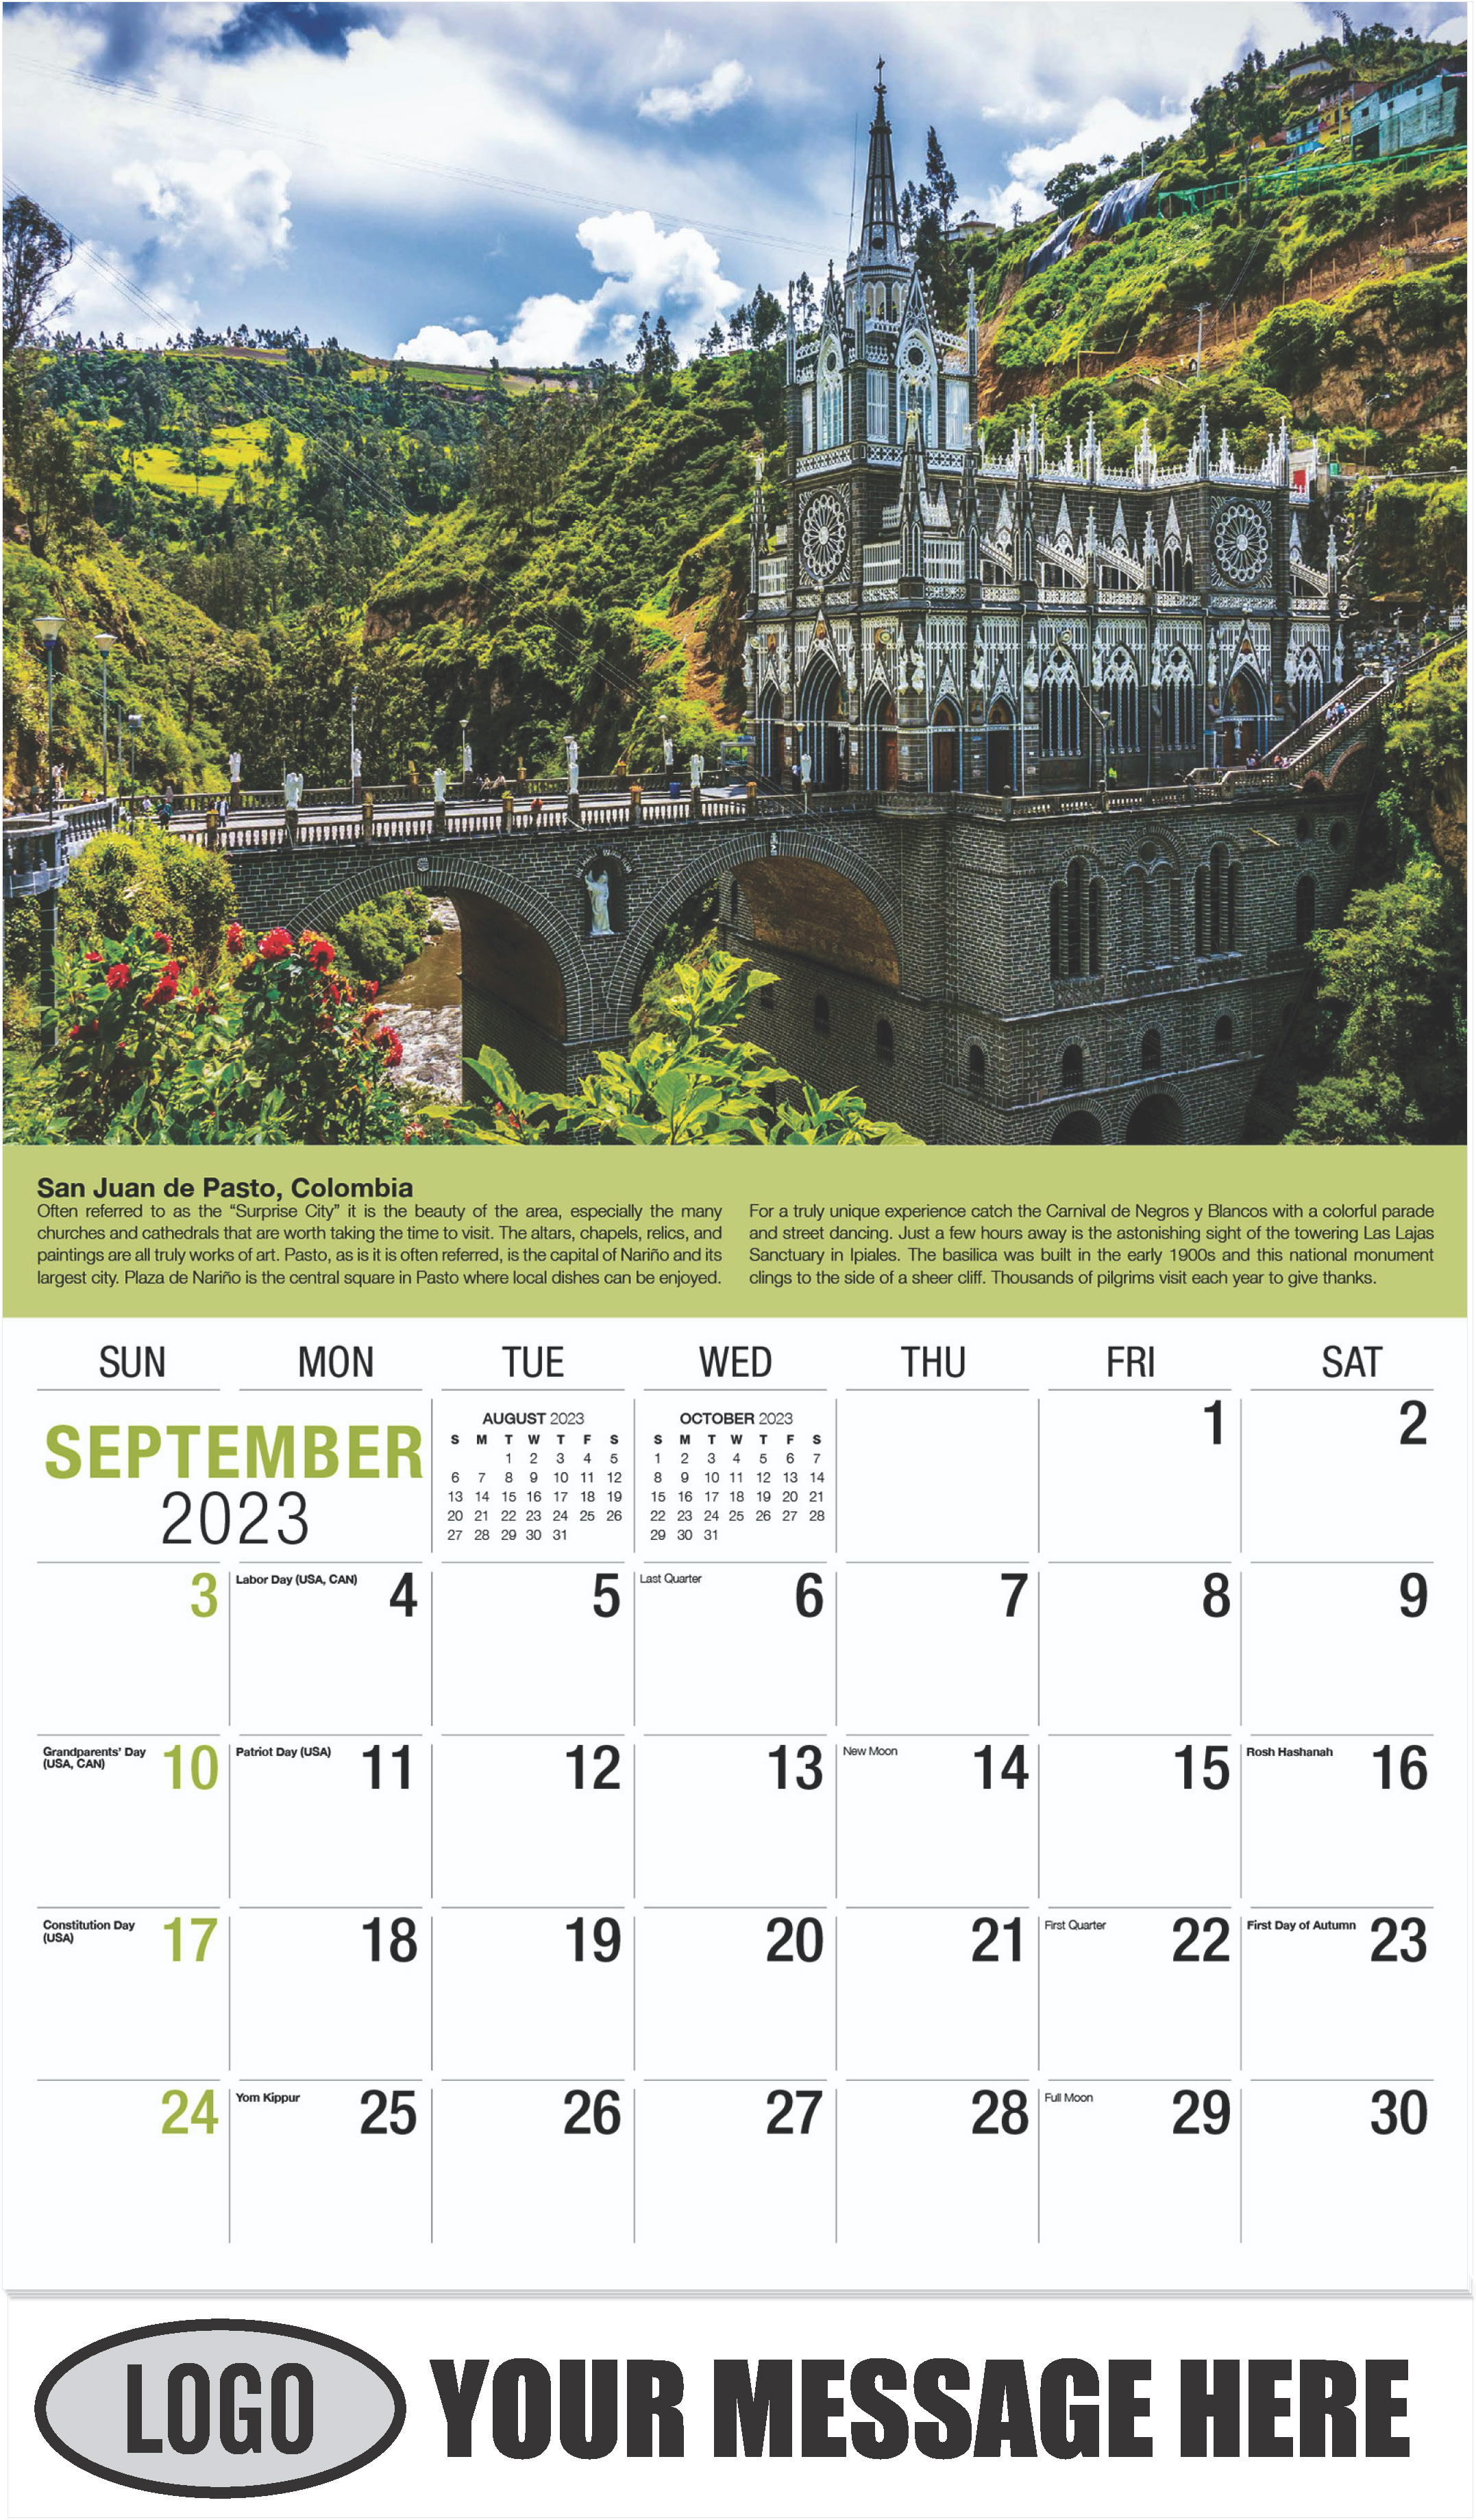 Las Lajas Cathedral, Colombia - September - World Travel 2023 Promotional Calendar